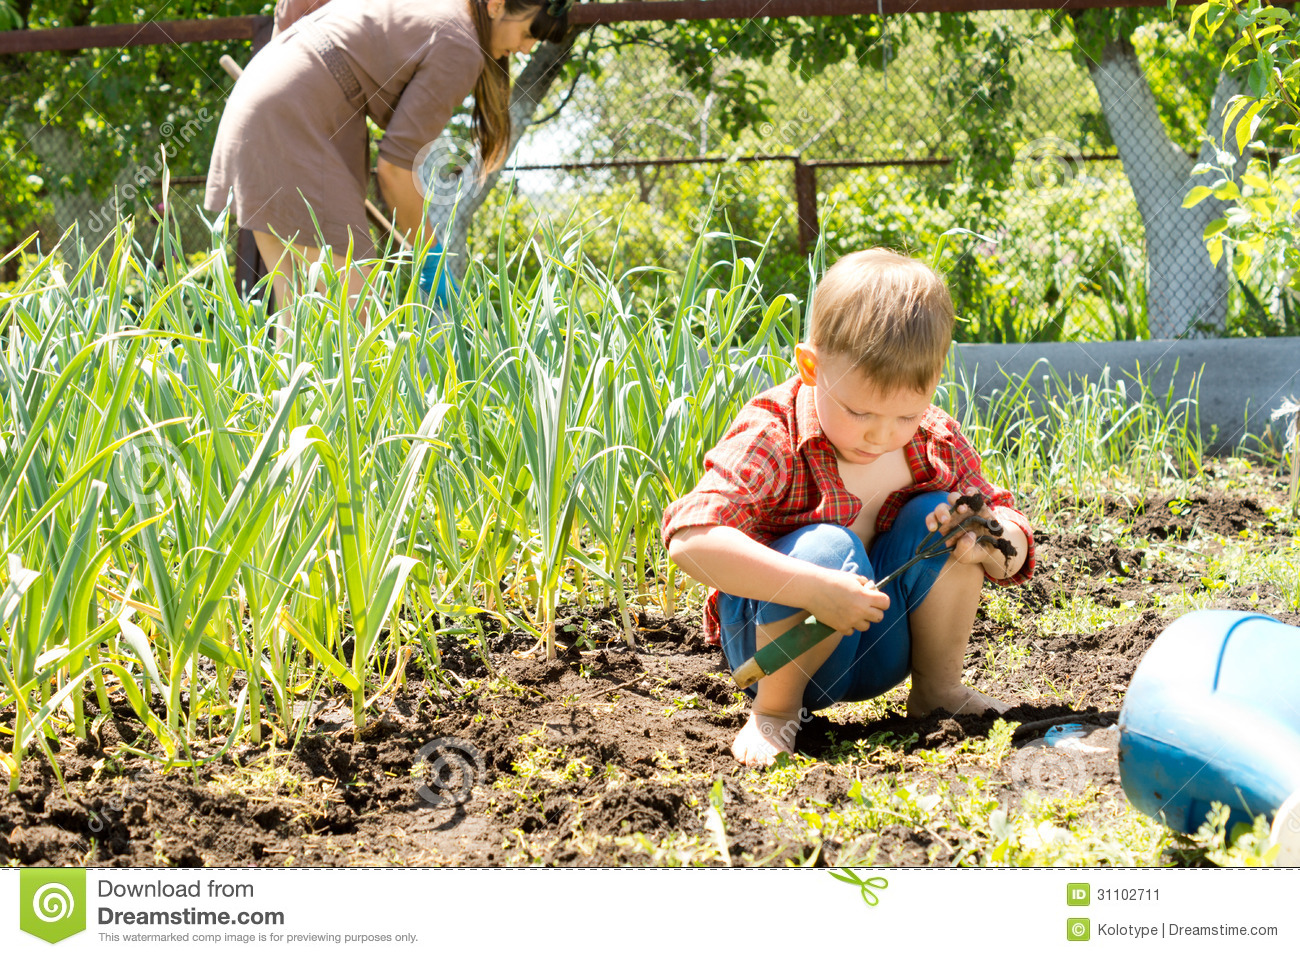 Little Boy Playing In A Vegetable Garden Stock Image   Image  31102711